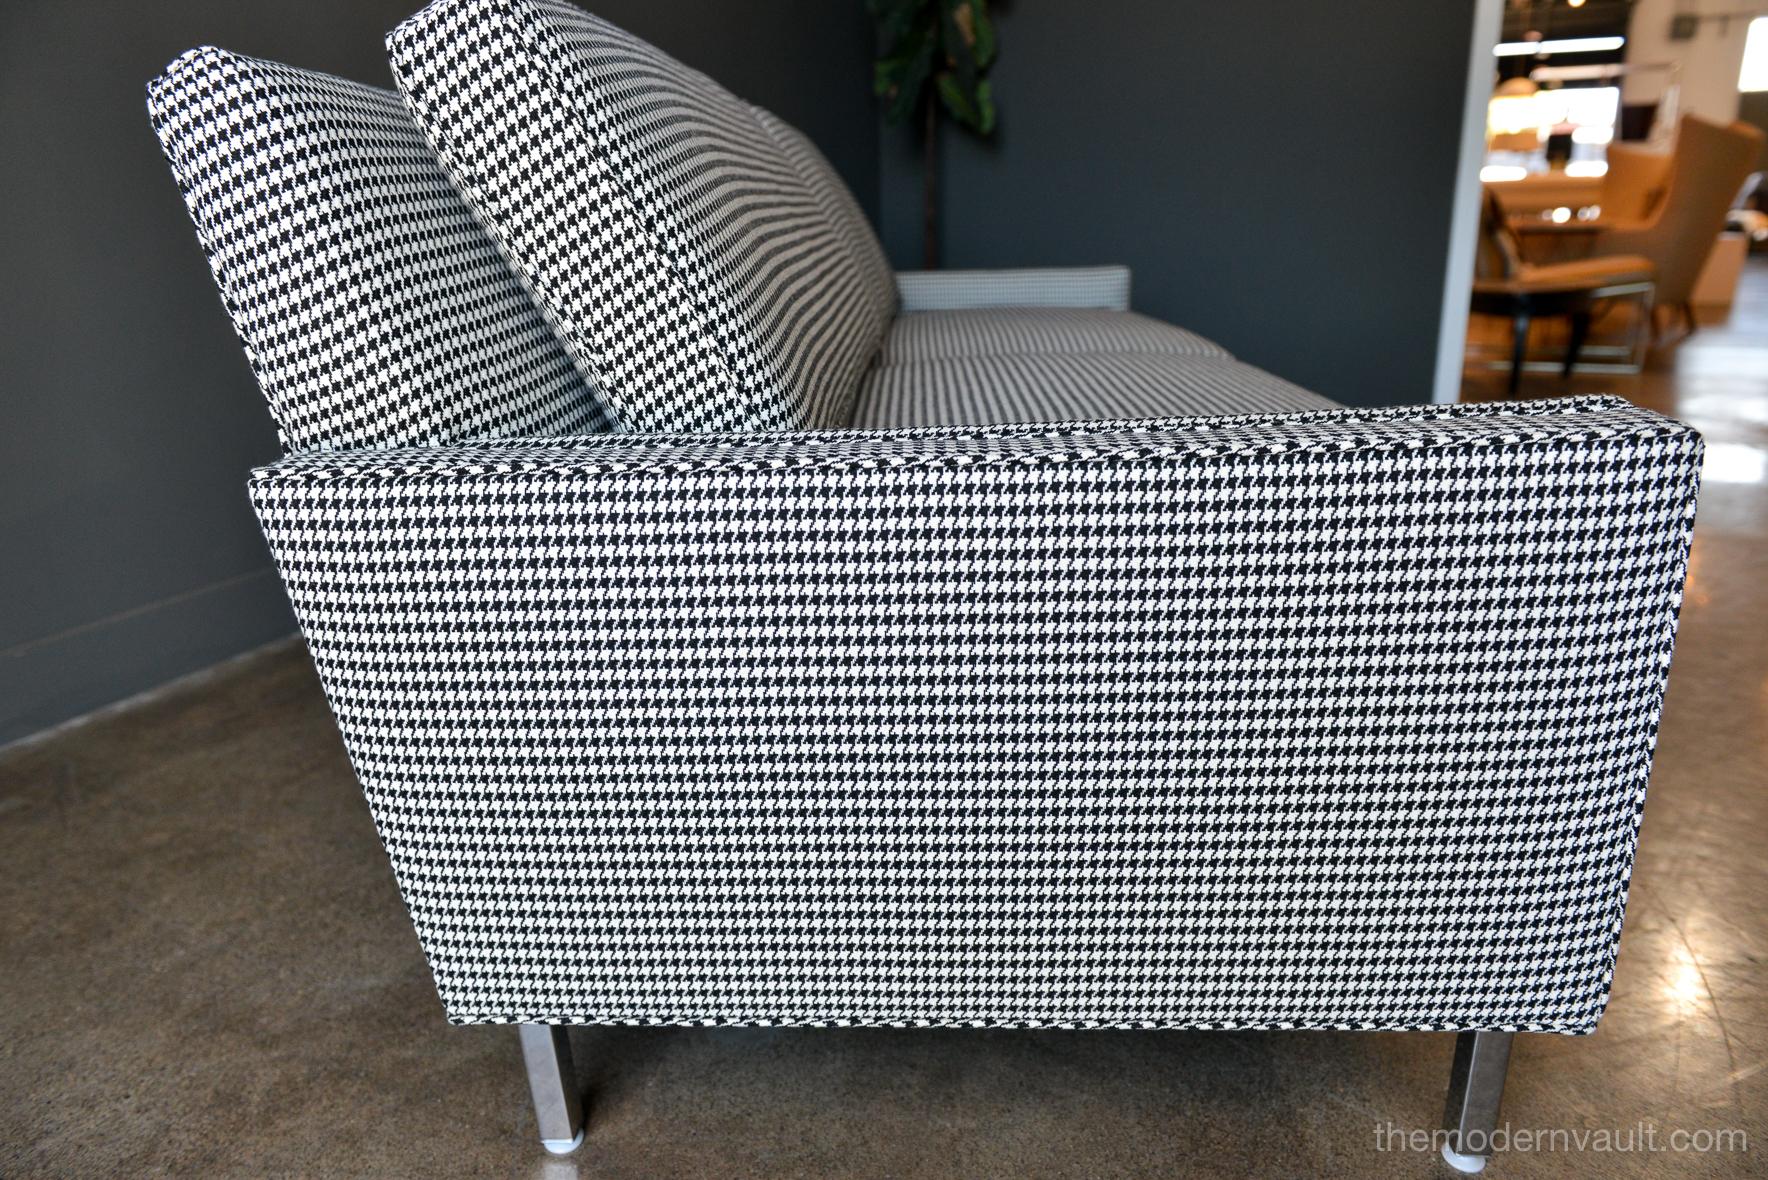 Mid-20th Century Mid-Century Modern Sofa in Black and White Houndstooth, circa 1955